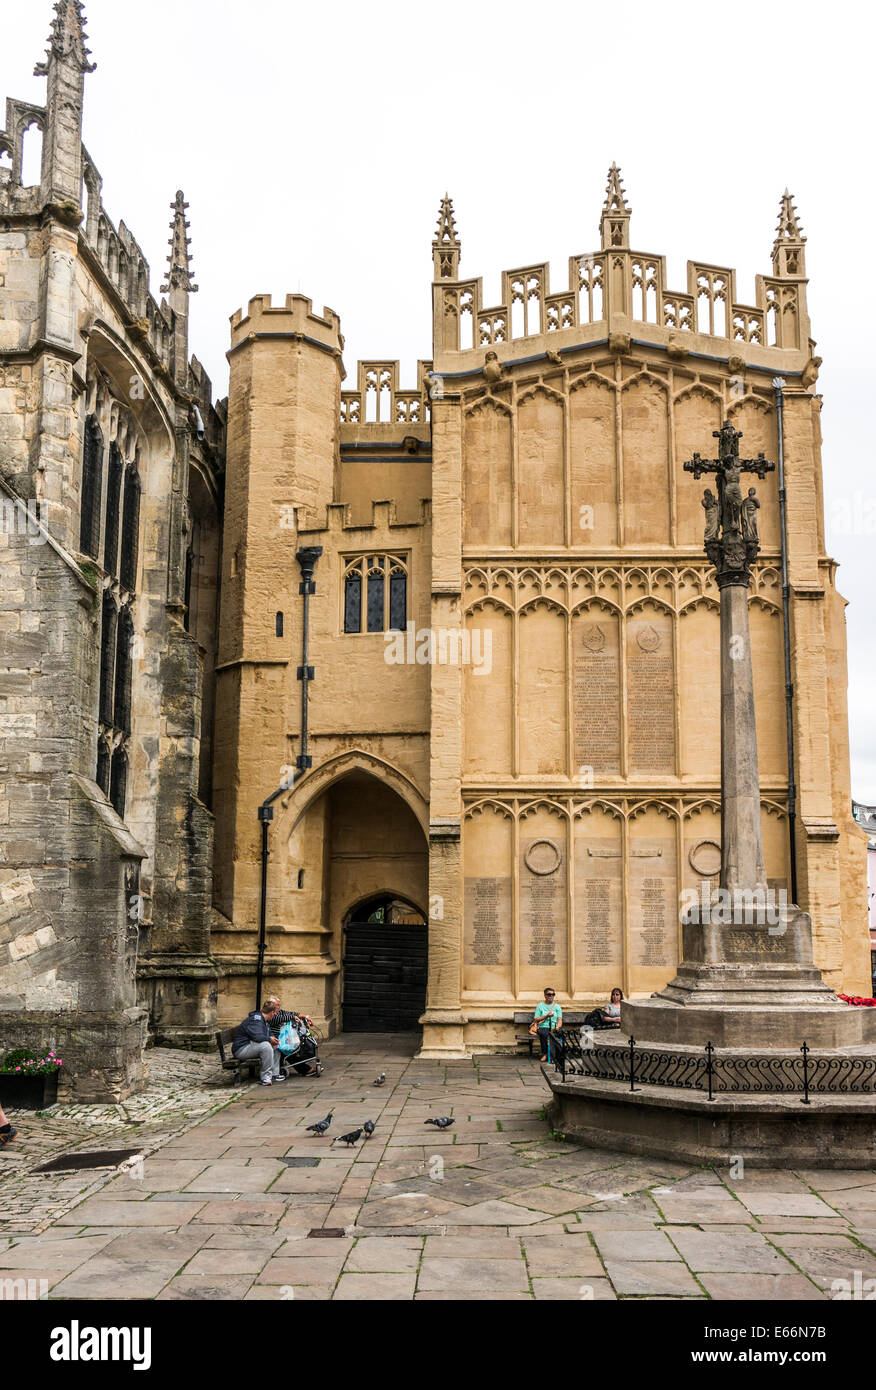 15th century south porch of the historic Church of St John Baptist, with people sitting outside, Cirencester, Cotswolds, Gloucestershire, England, UK. Stock Photo